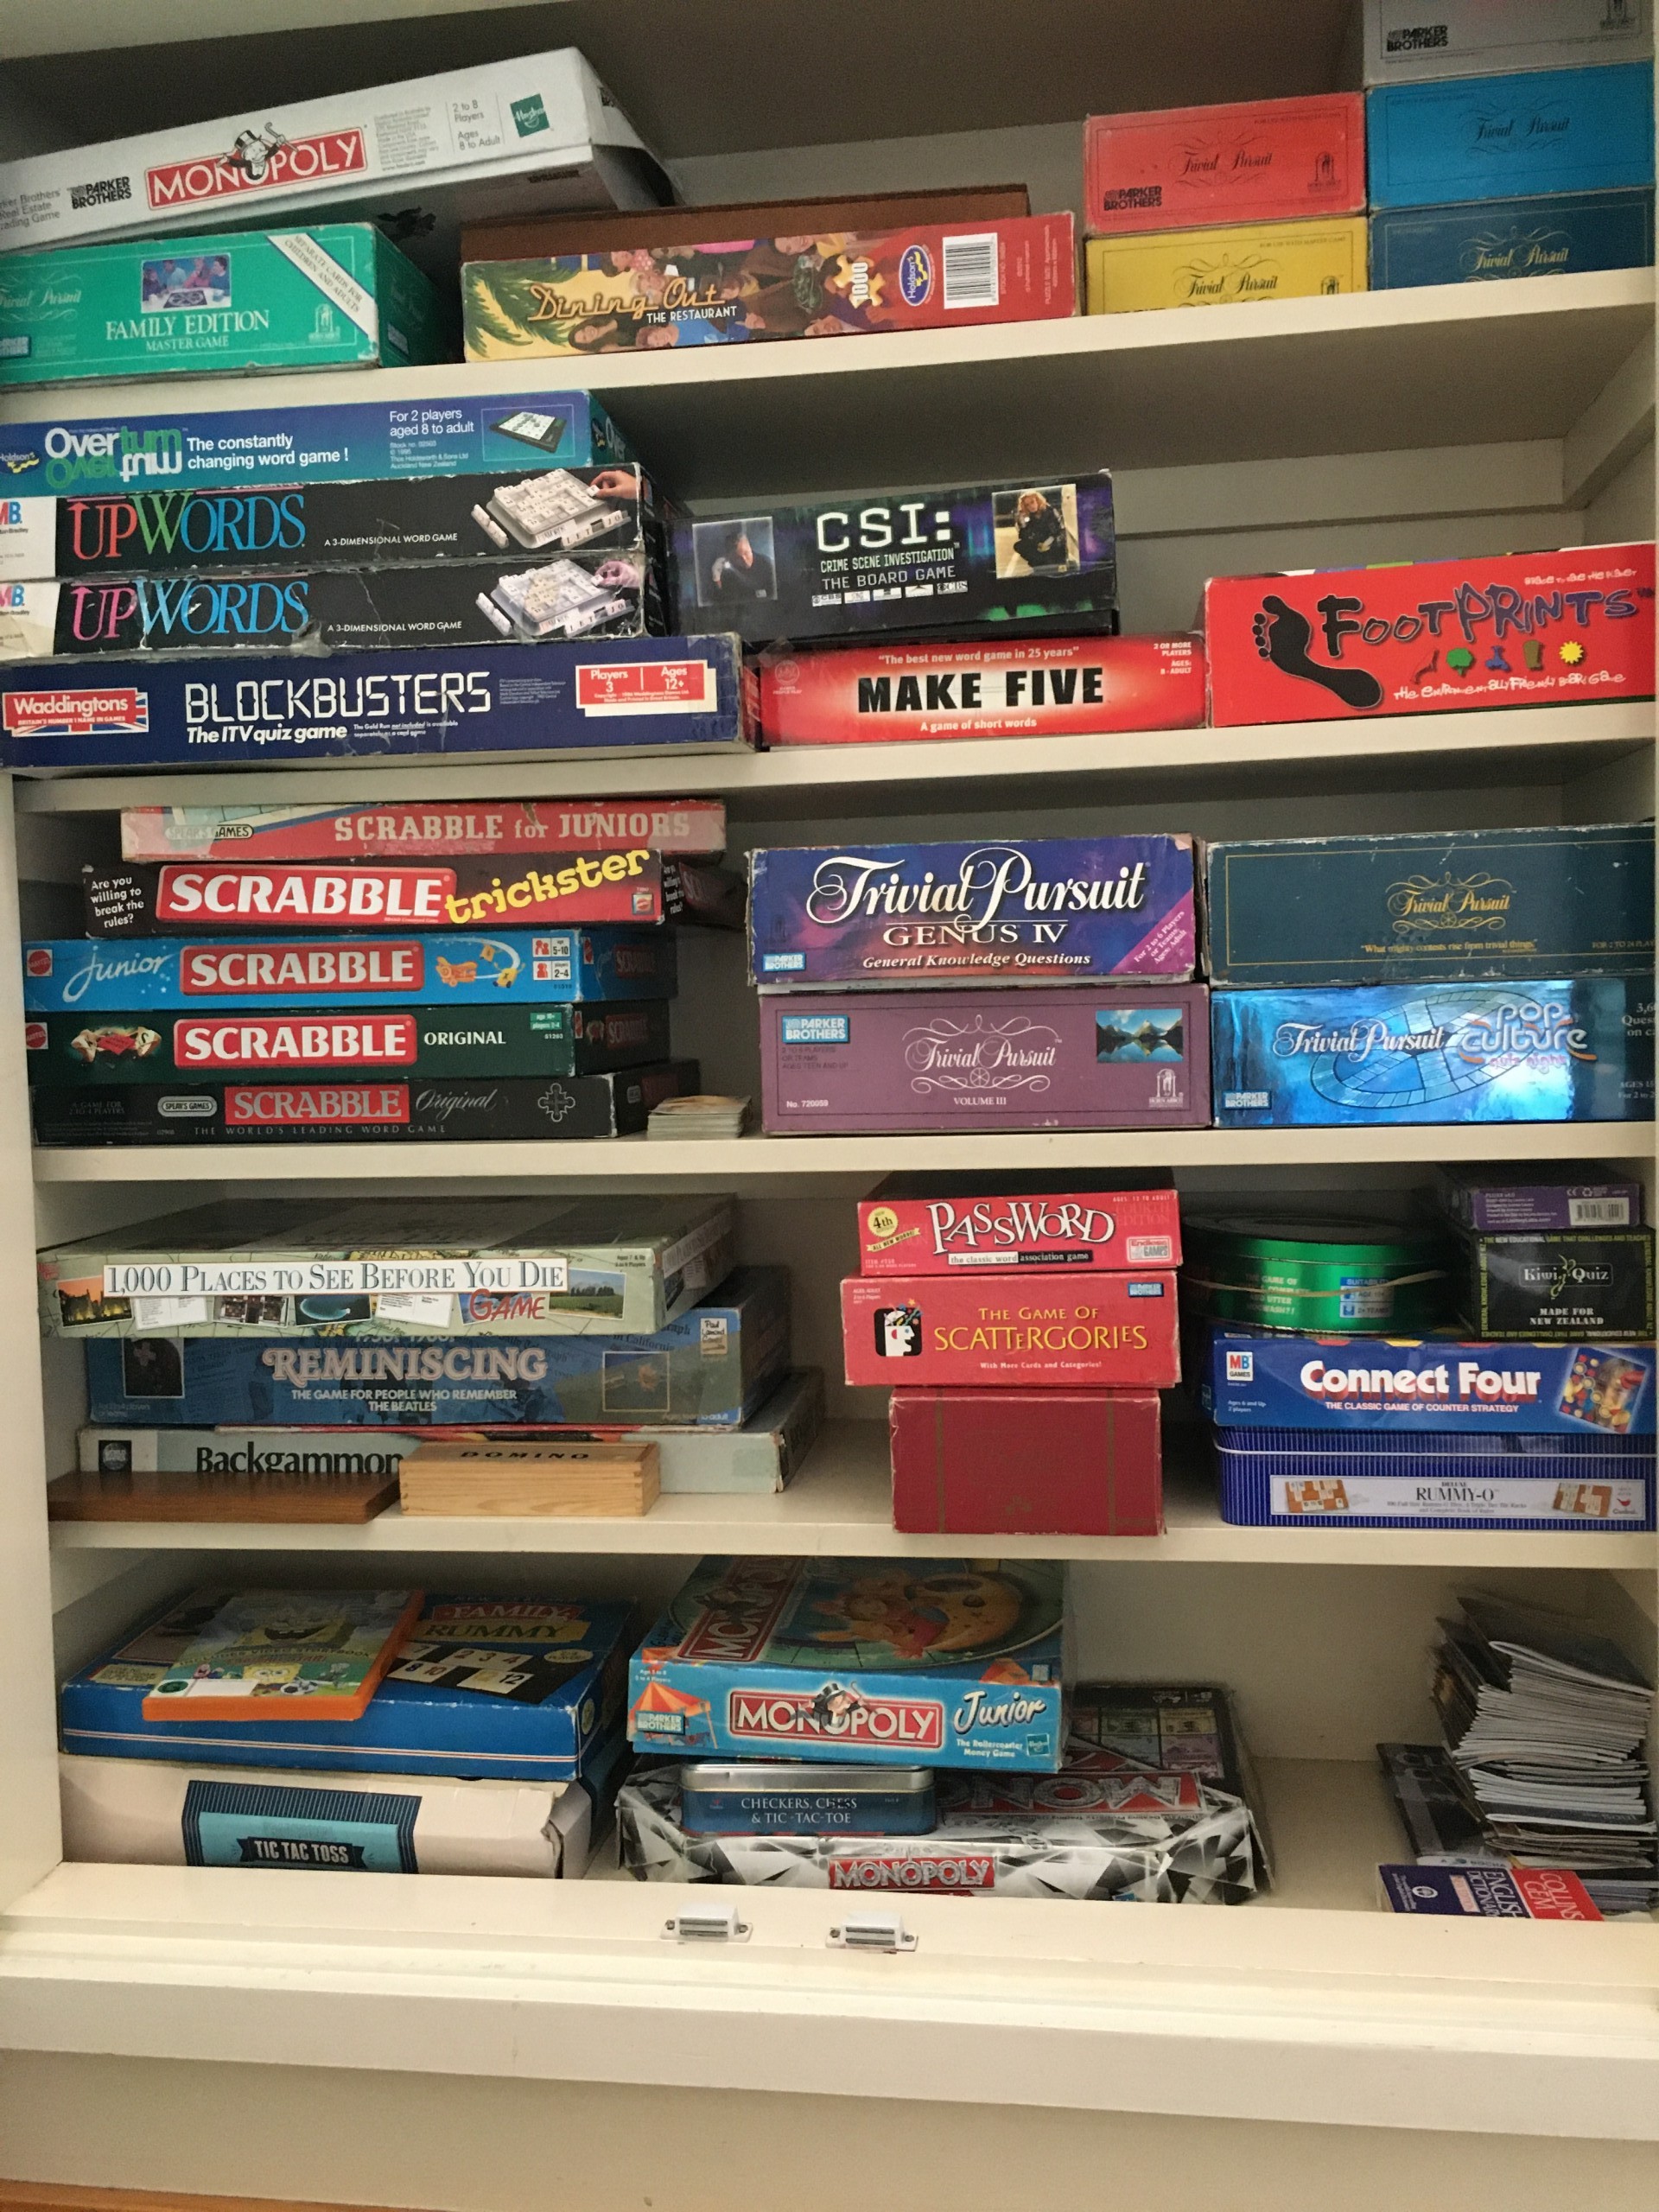 Plenty of board games available for wet day entertainment